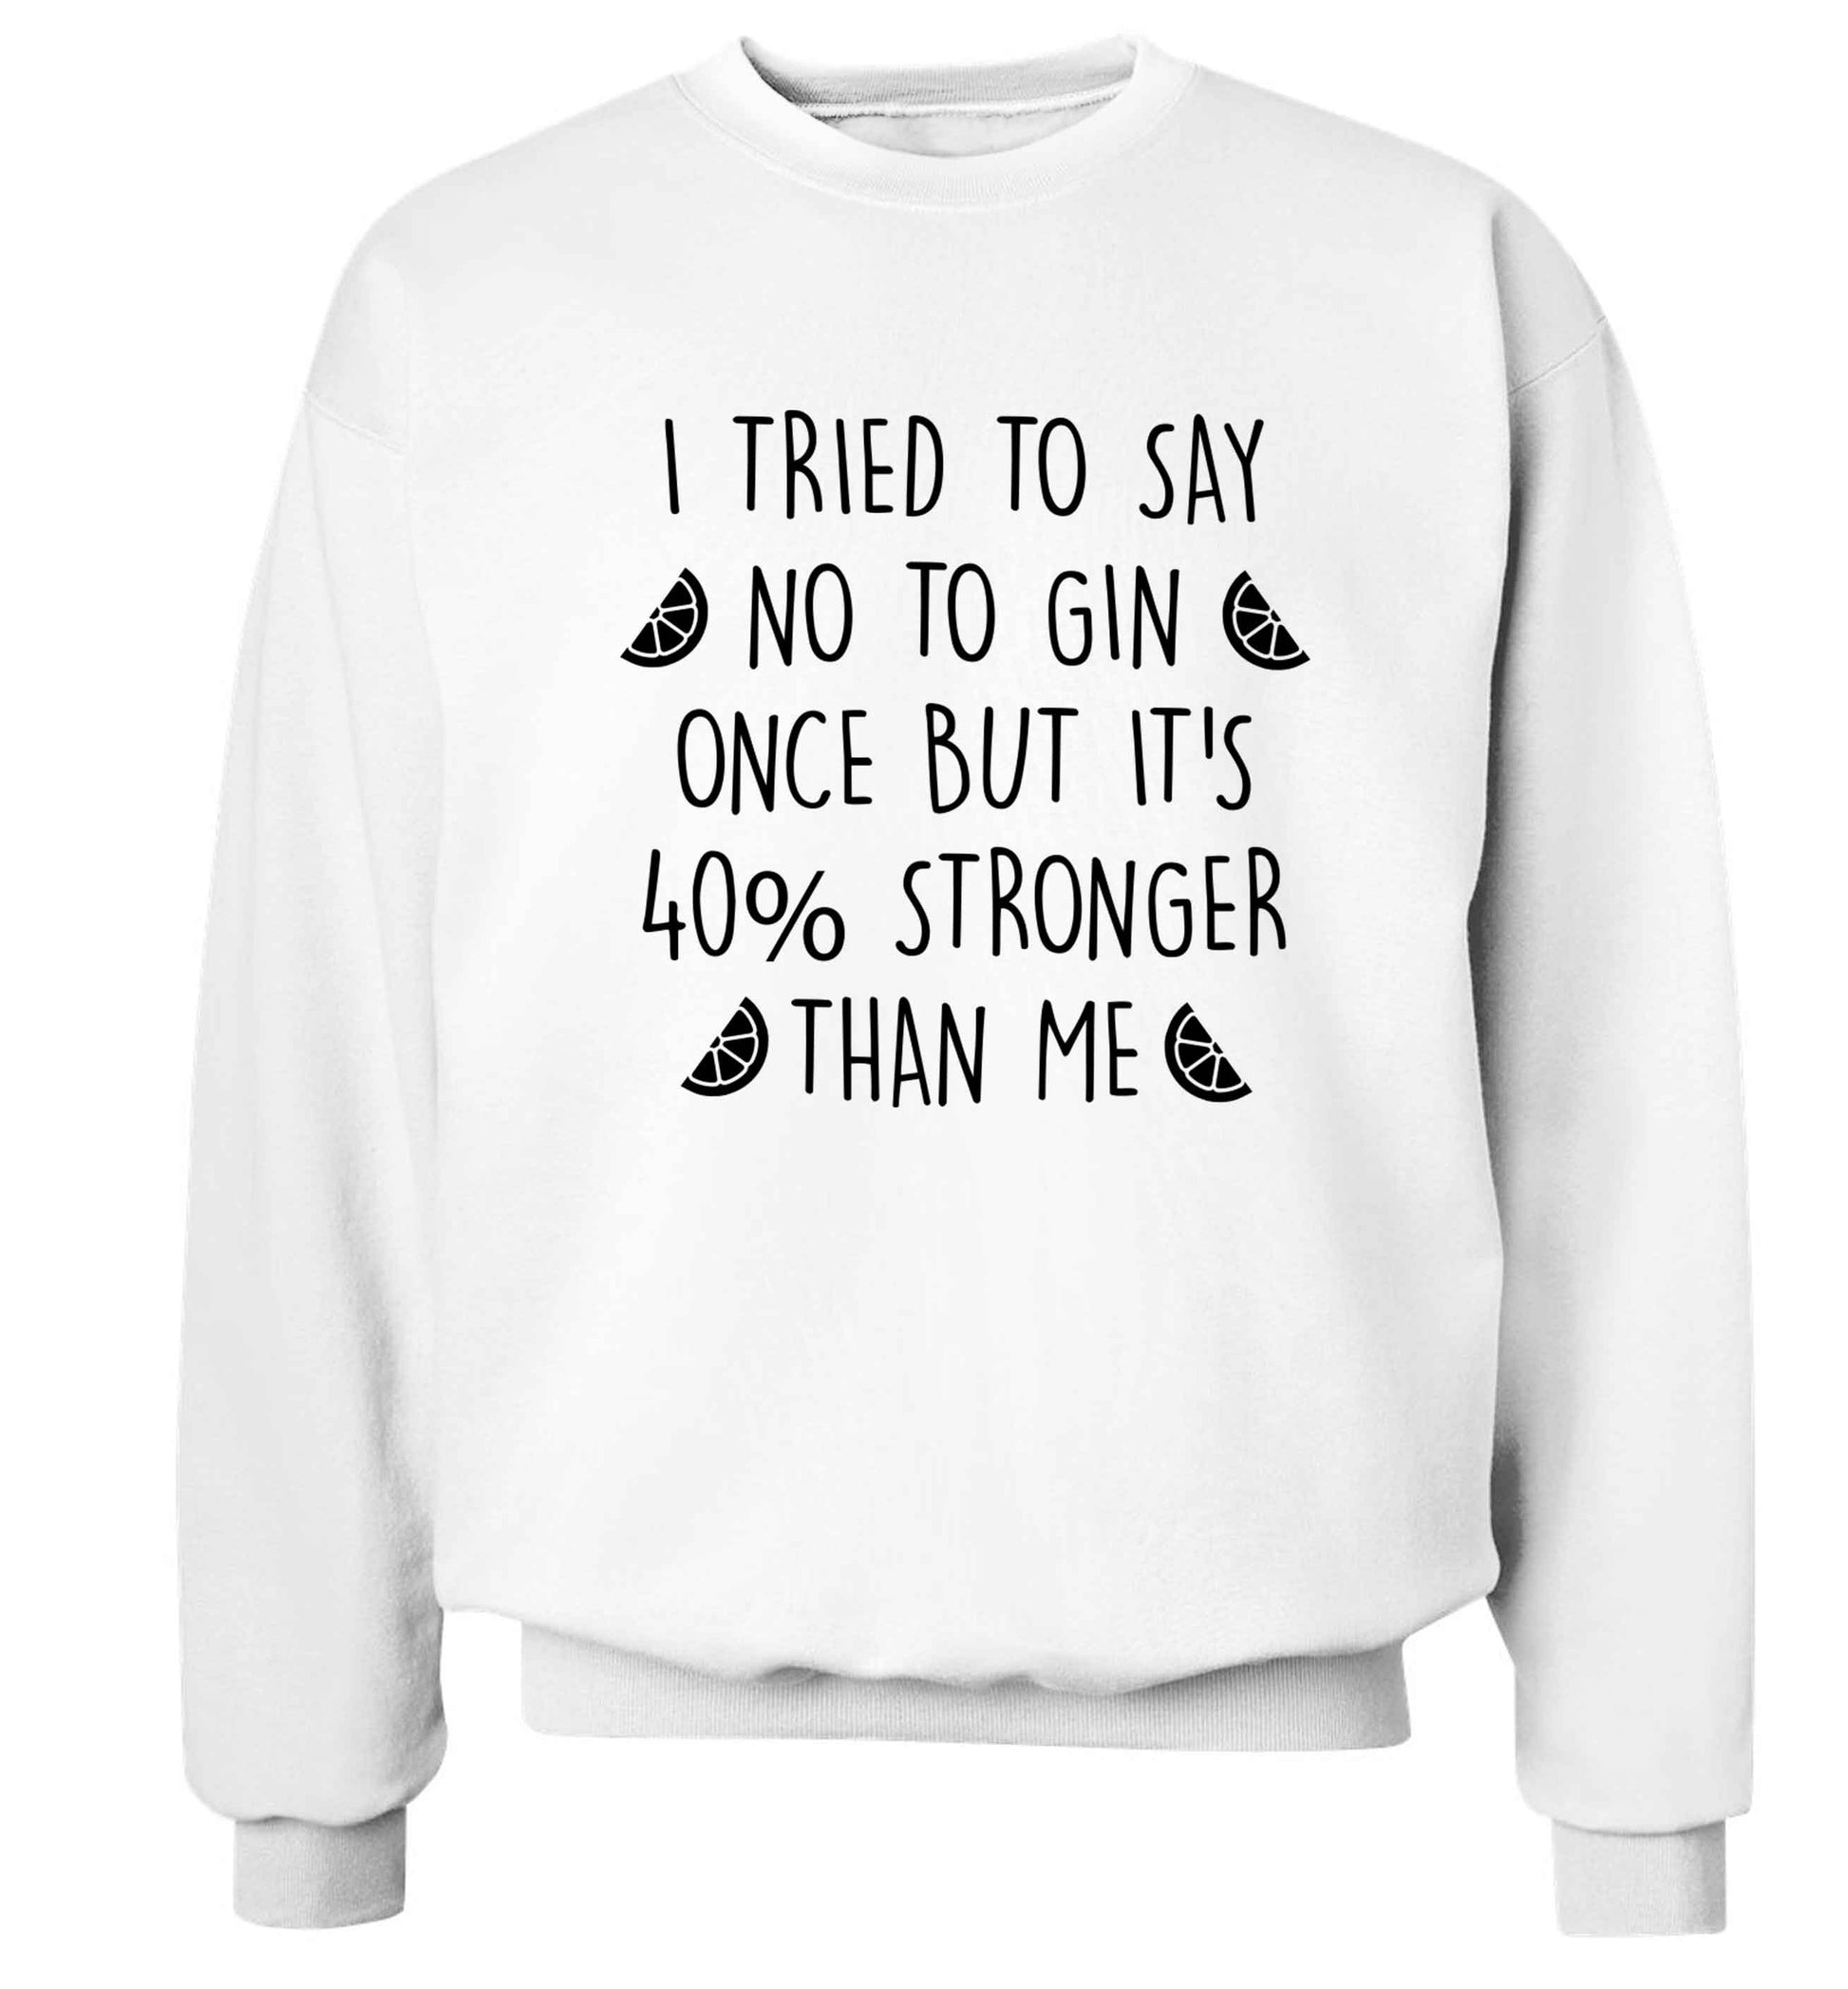 I tried to say no to gin once but it's 40% stronger than me Adult's unisex white Sweater 2XL